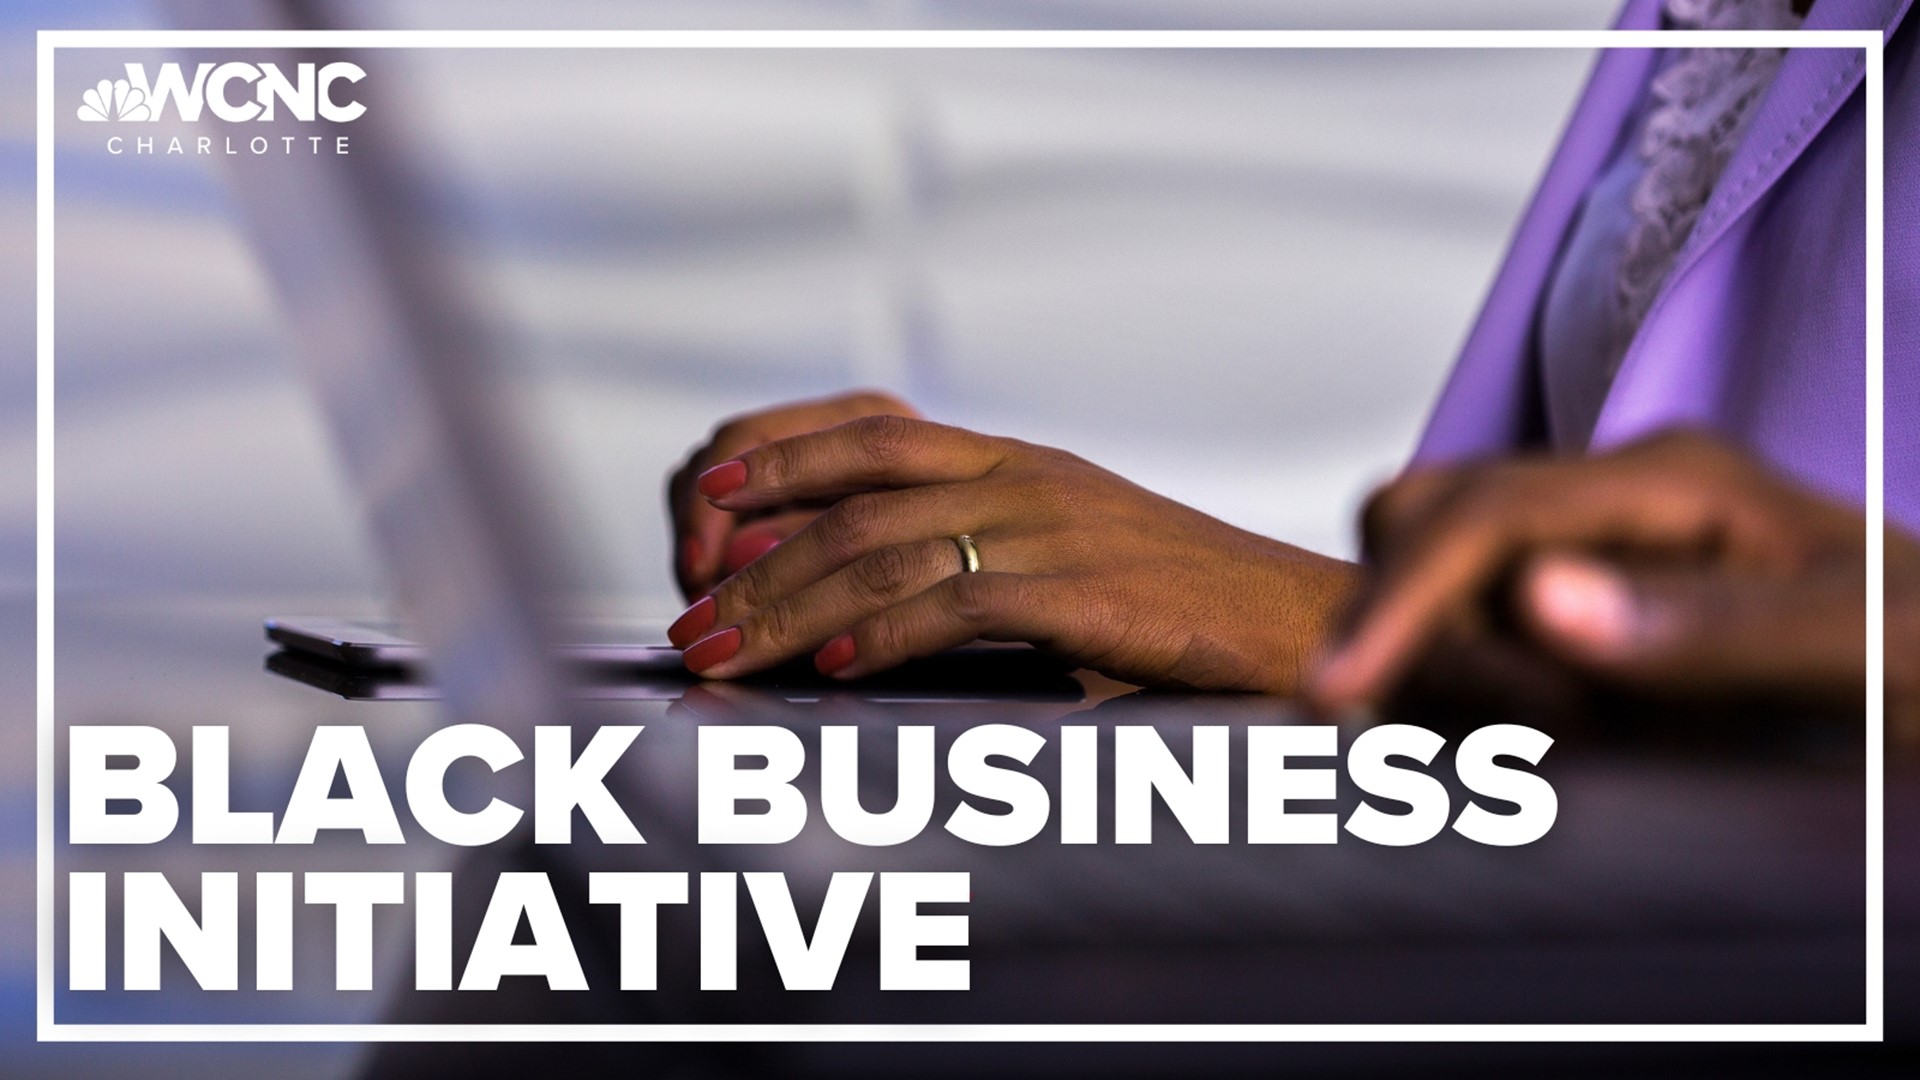 The goal of 1MBB is to help one million Black businesses across the country grow by the year 2030.